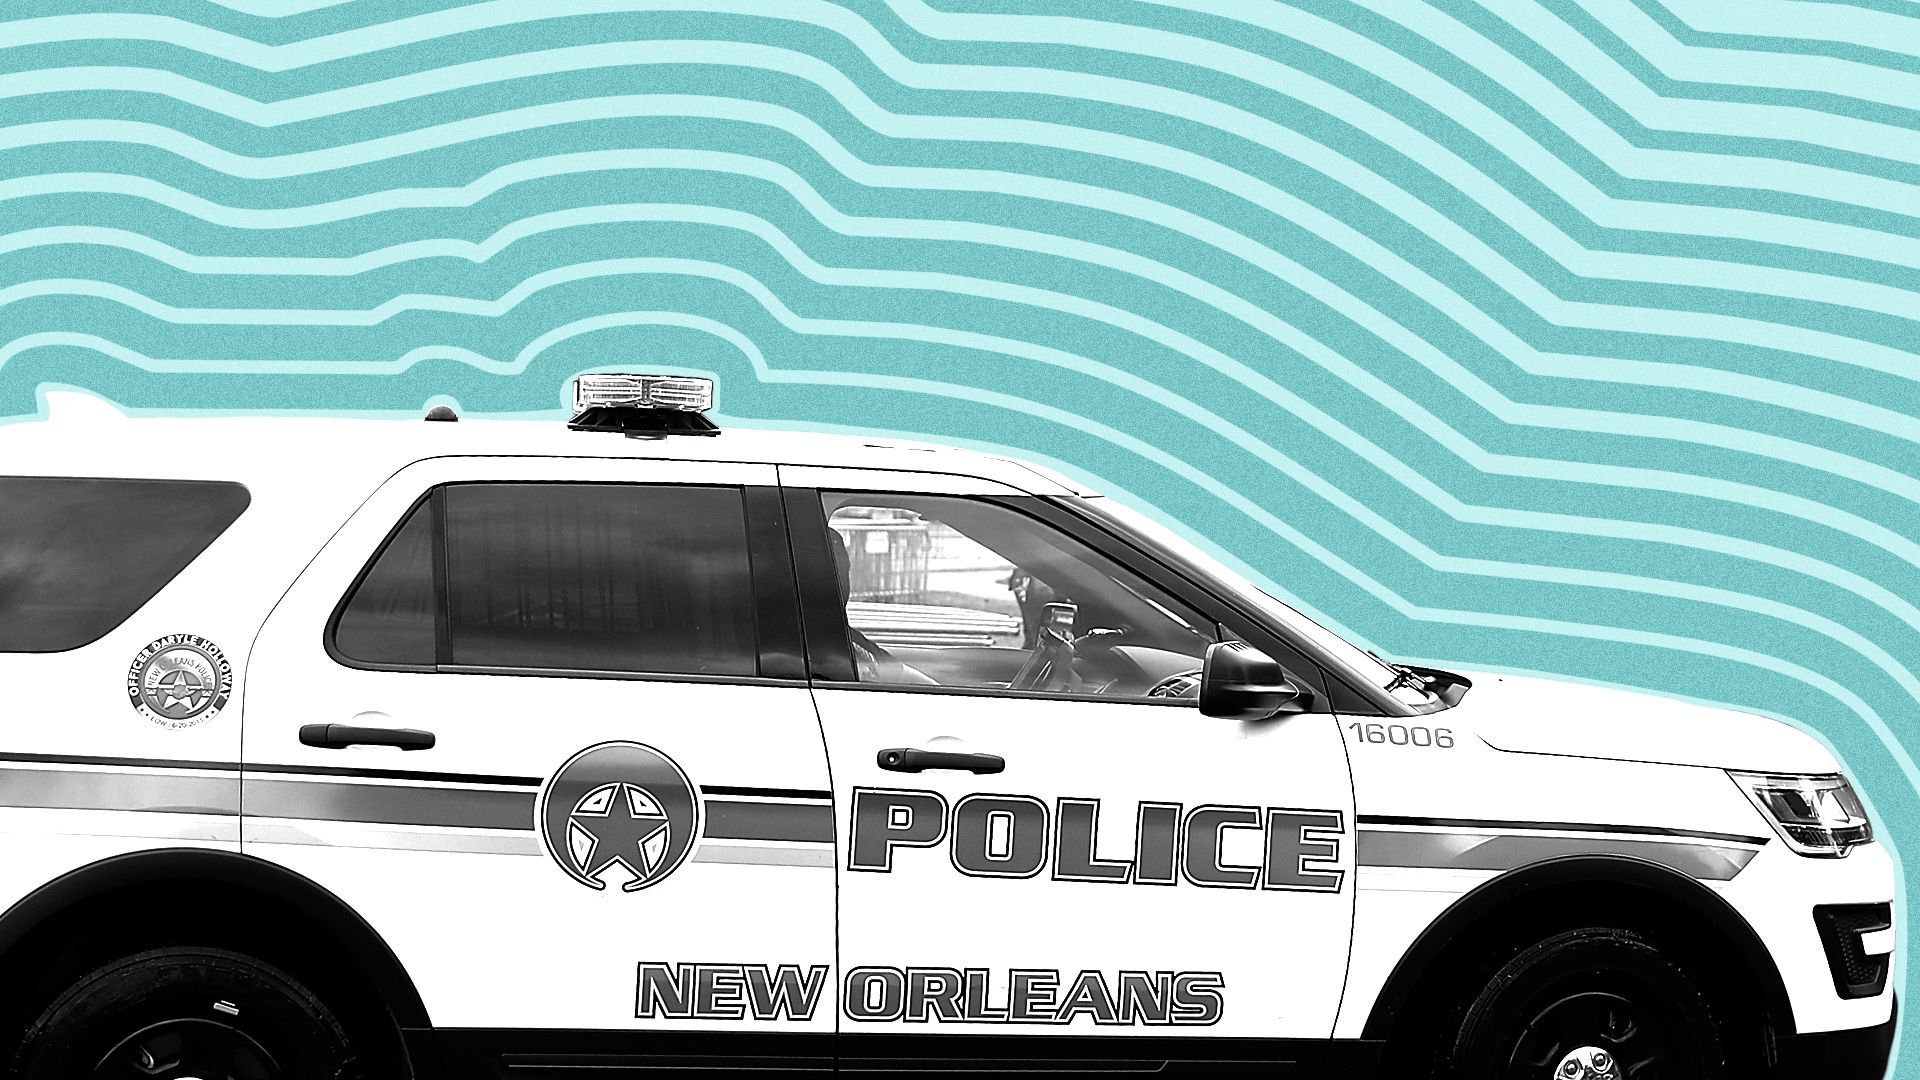 Photo illustration of a New Orleans police car with lines radiating from it.